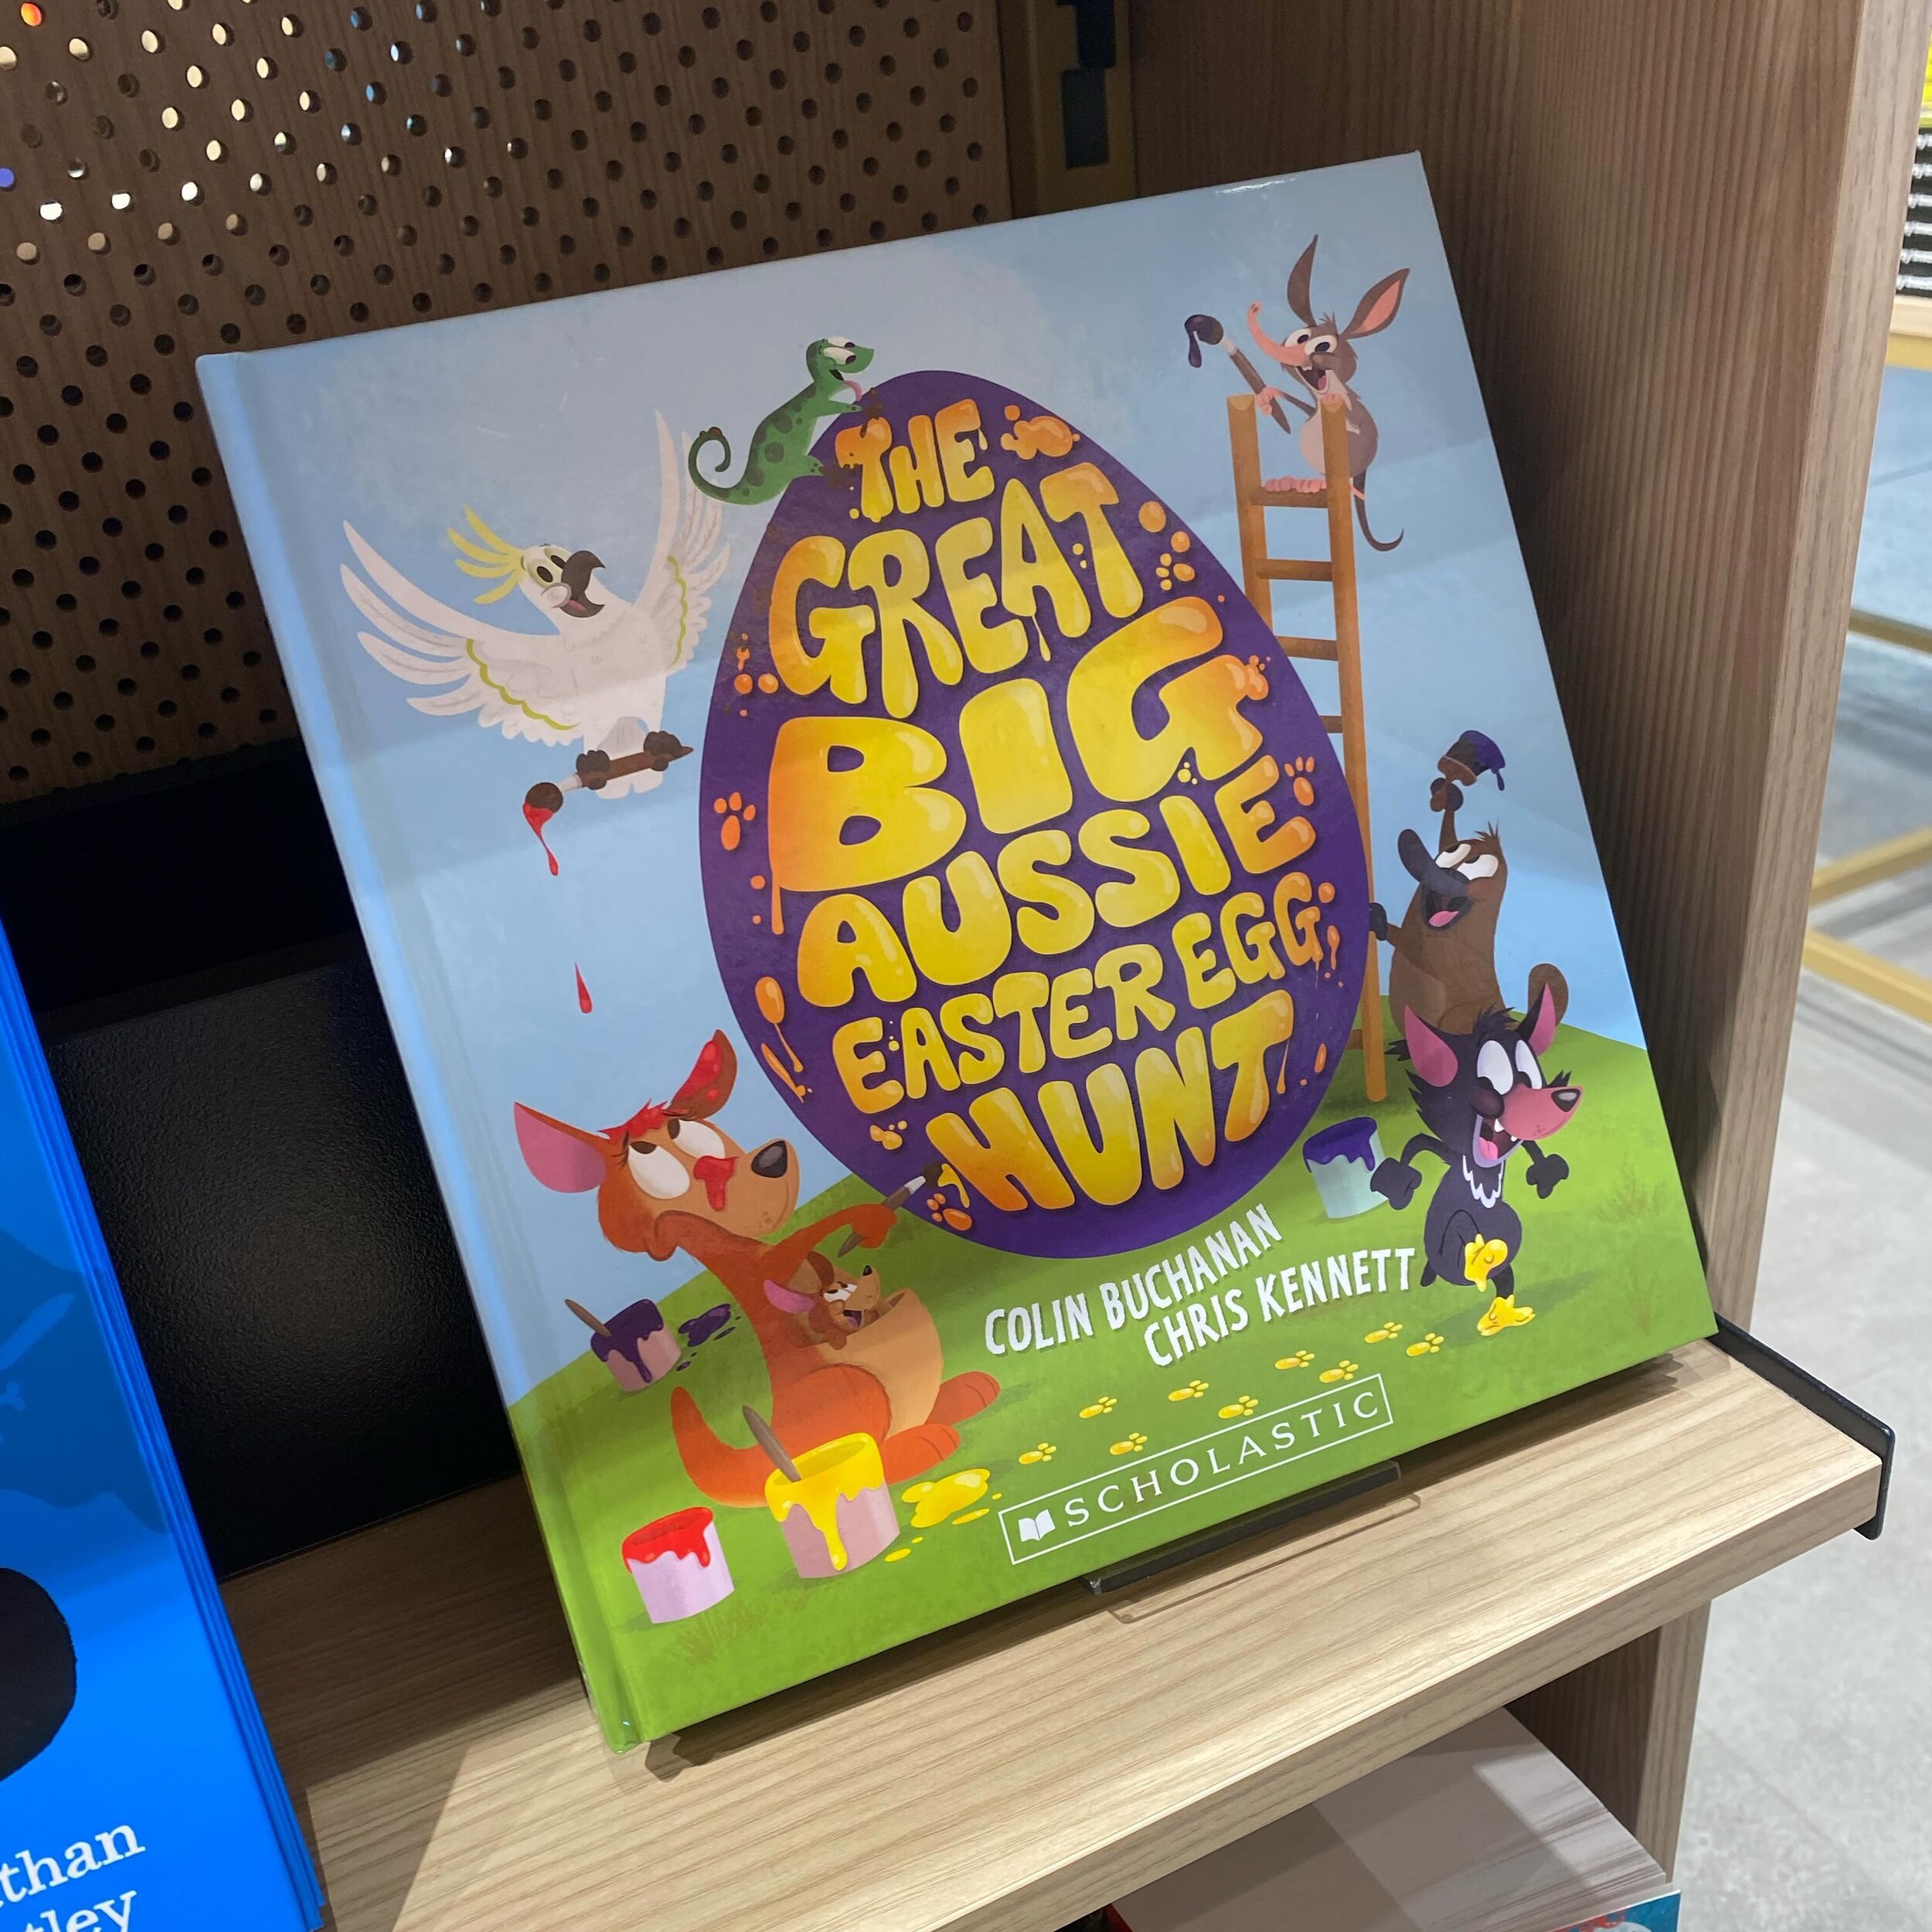 Not many of my books in the airport today. I guess they must all sell out instantly, at least that&rsquo;s what I tell myself.

But look! It&rsquo;s nearly Easter and this old/new release is back just in time! Who needs chocolate when you can feast y